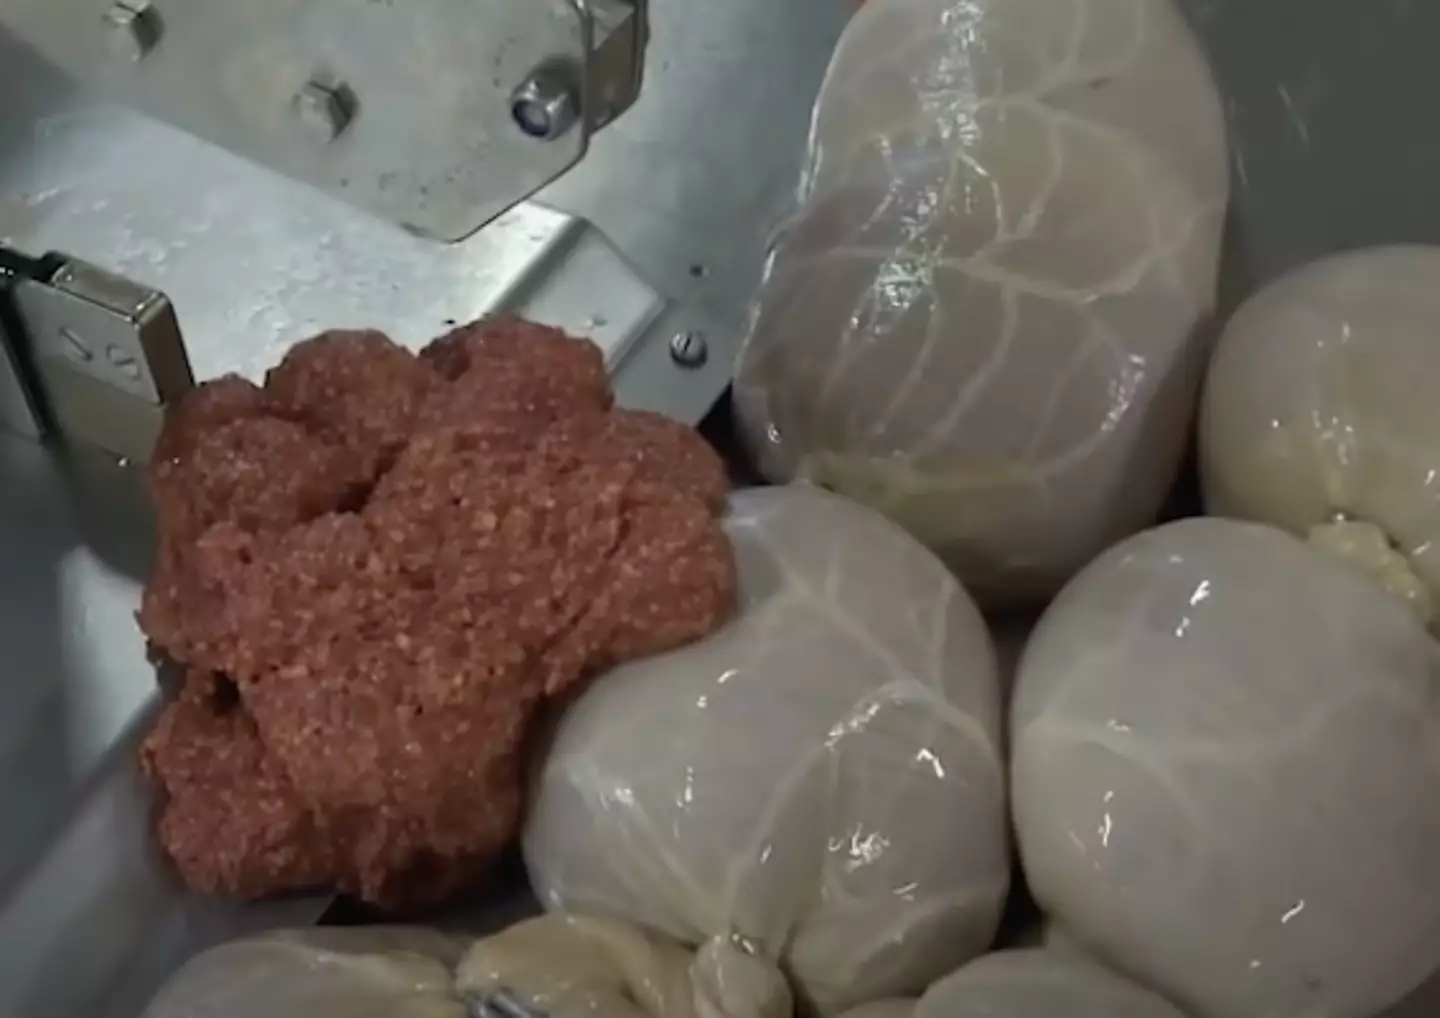 Would you try haggis after watching this video?